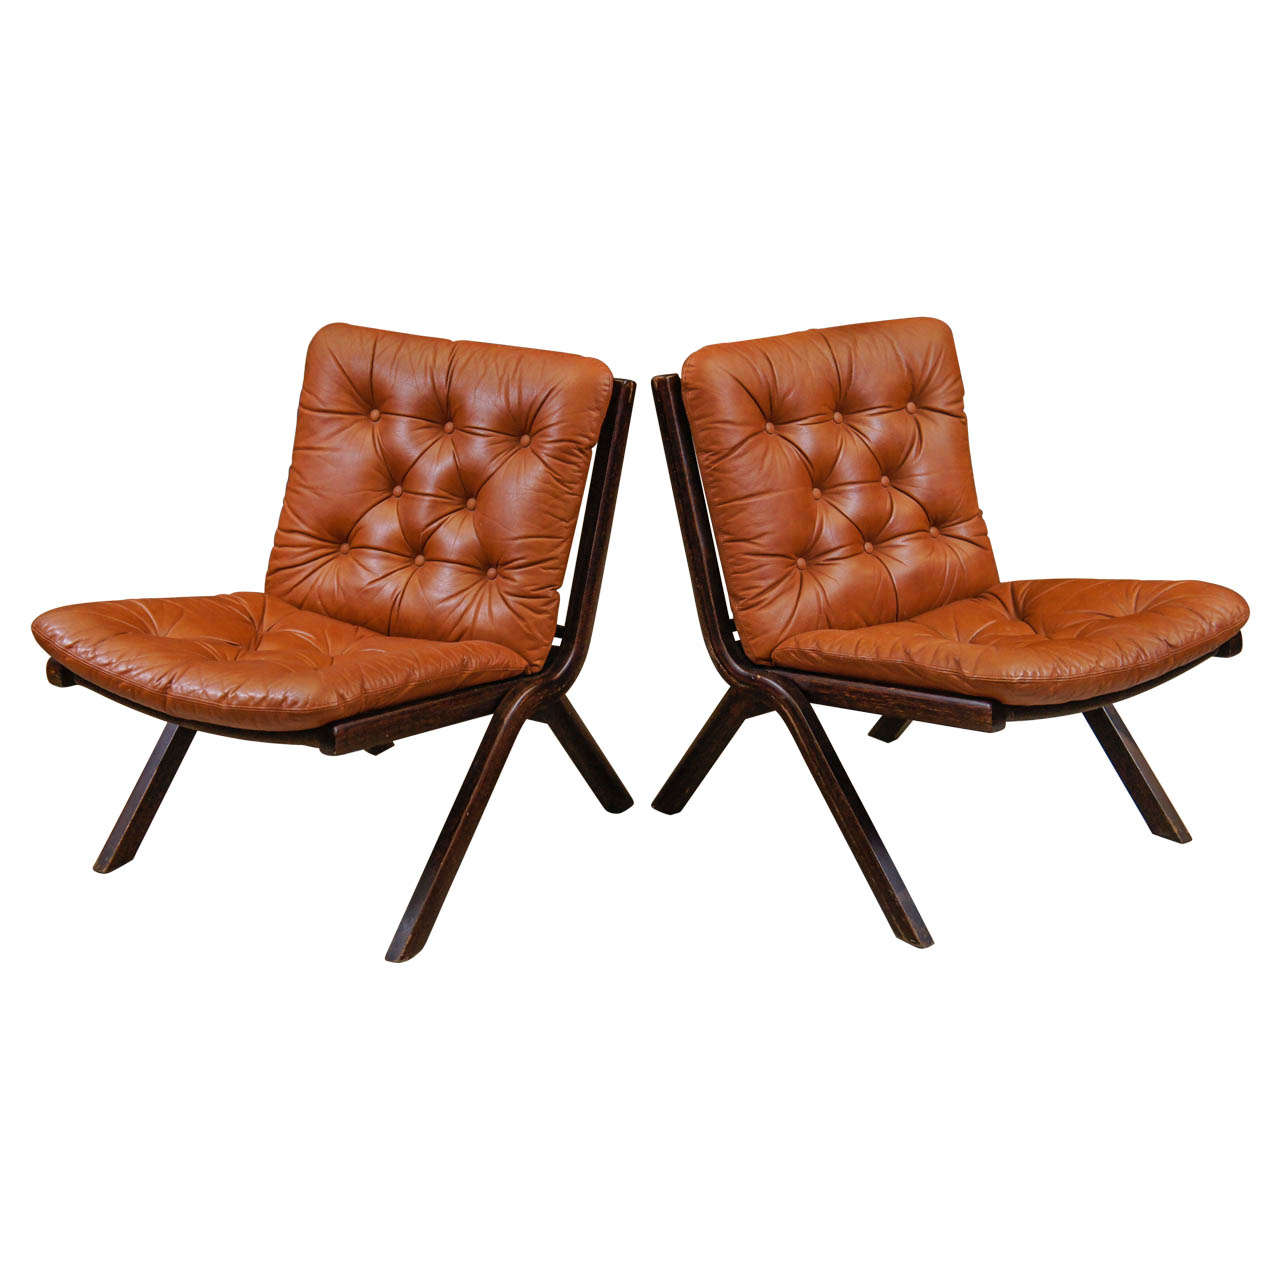 Pair of Norwegian Side Chairs with Leather Cushions